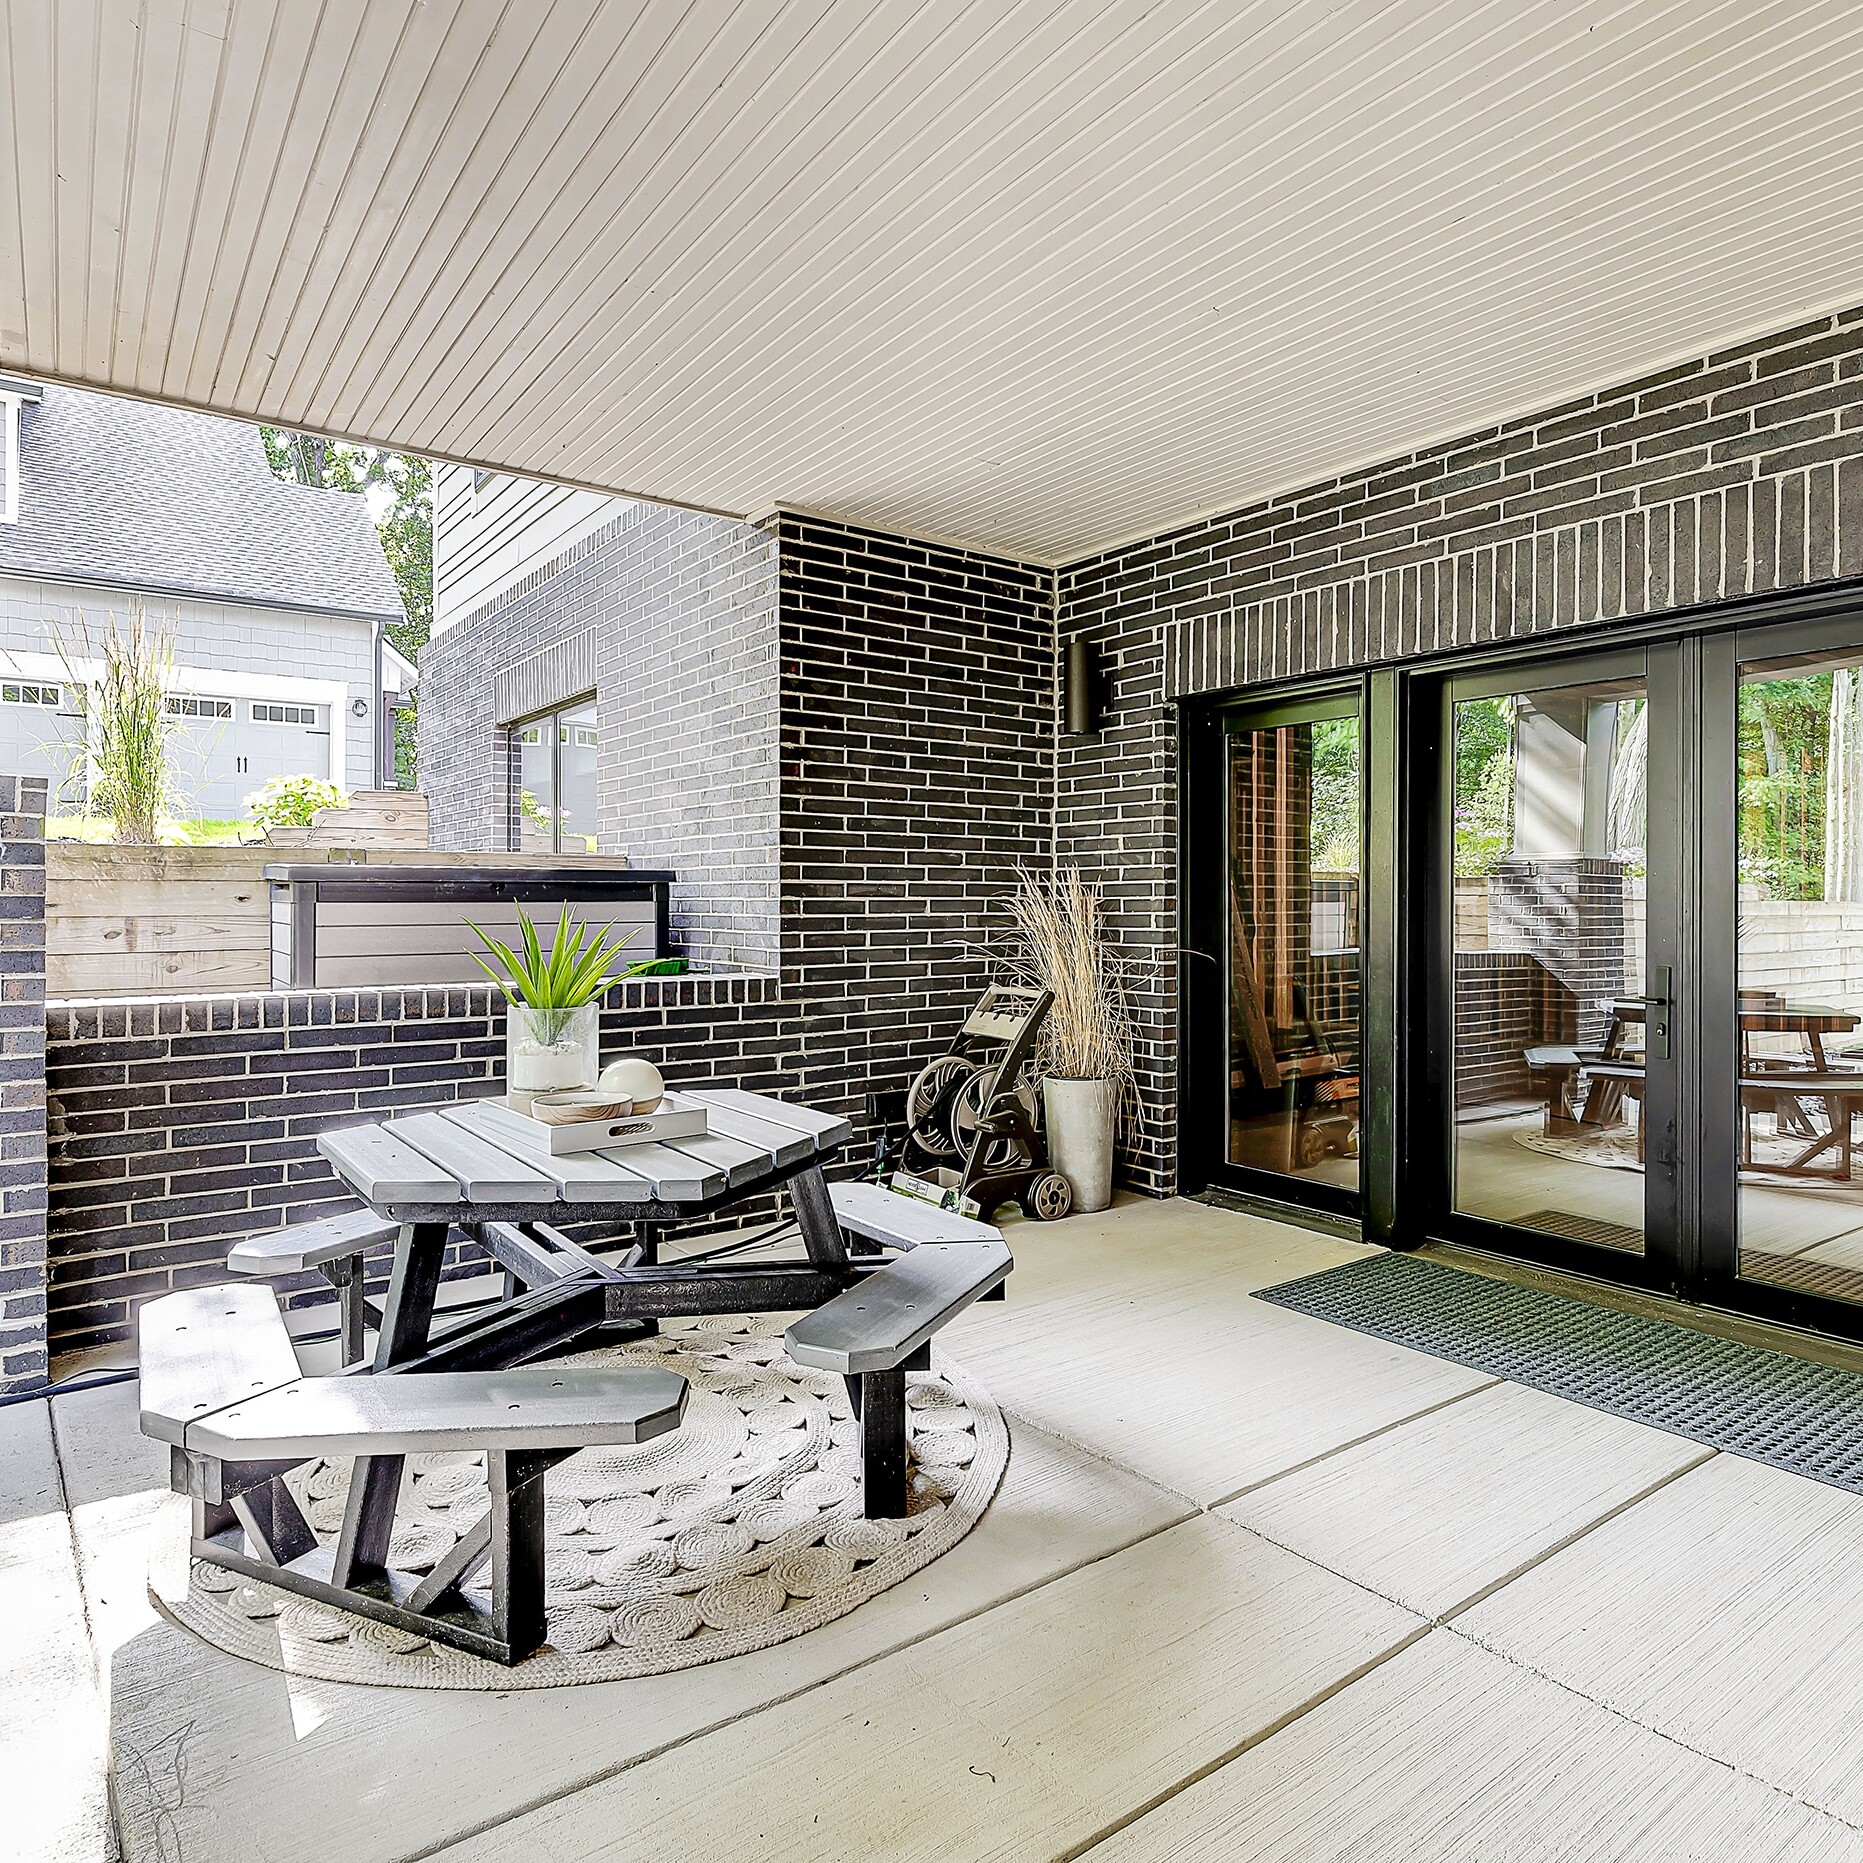 A brick patio with a table and chairs.